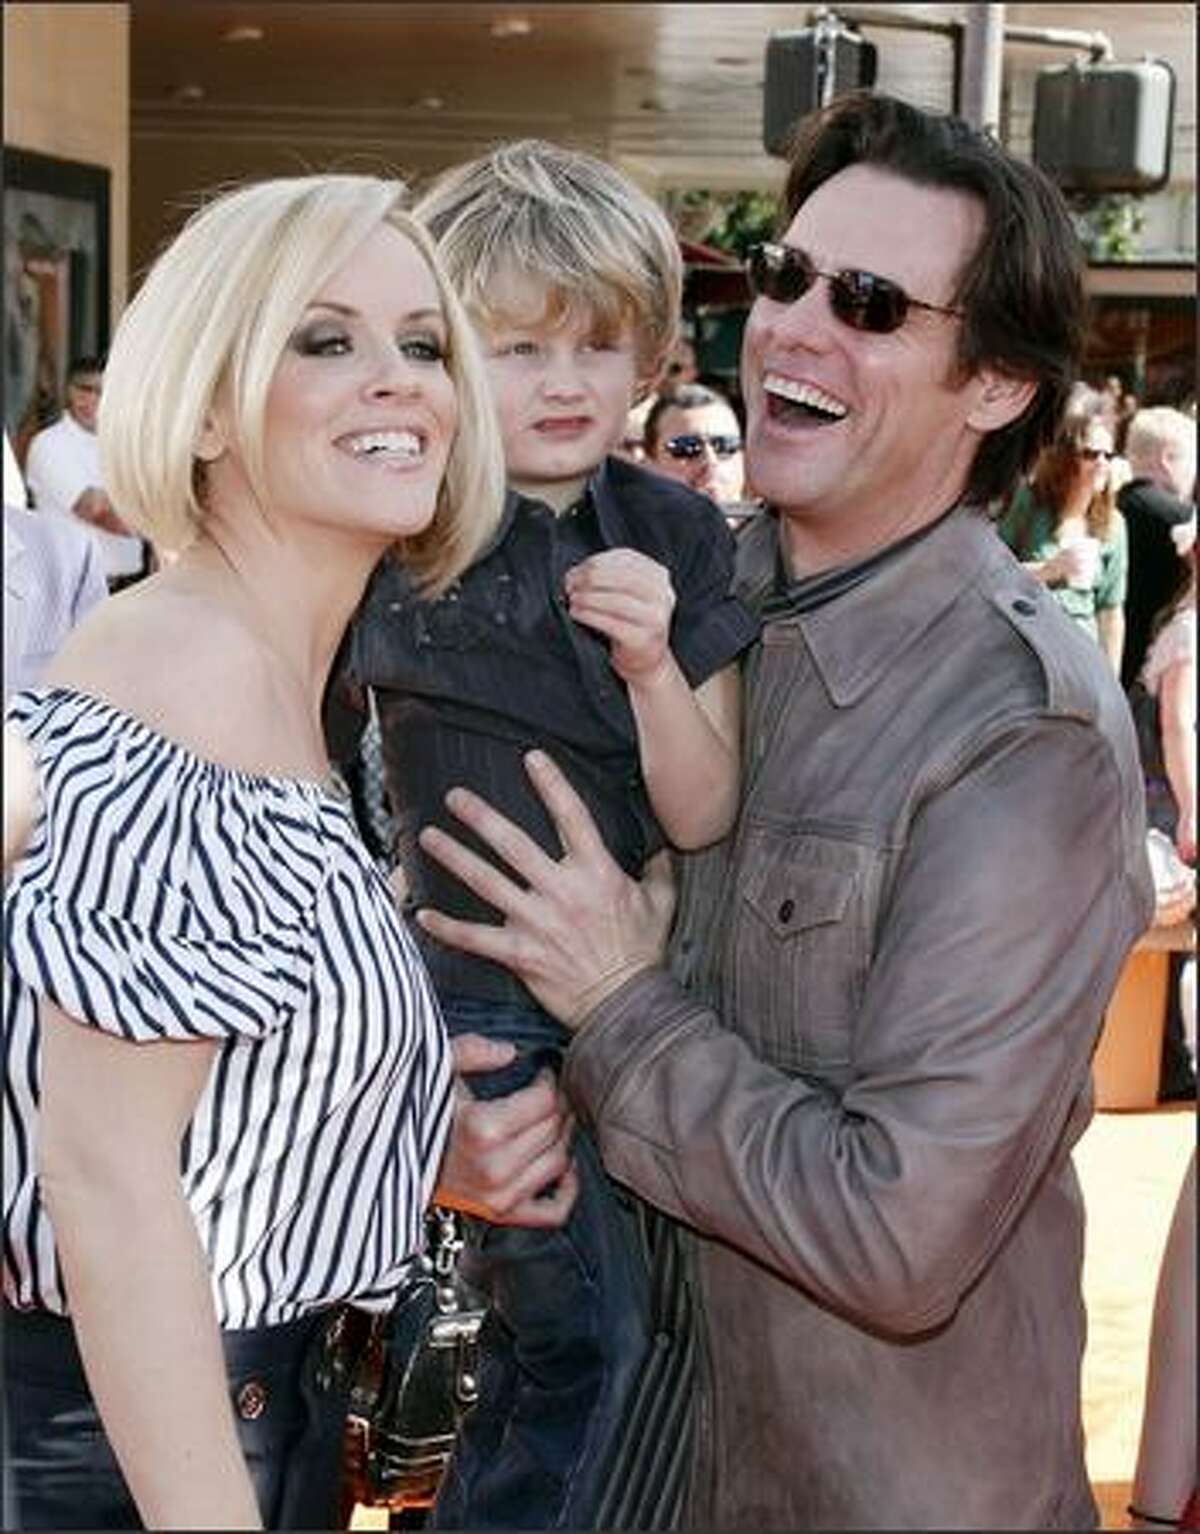 Actress Jenny McCarthy, her son Evan and actor Jim Carrey arrive at the world premiere of 20th Century Fox's "Horton Hears a Who!" at the Mann Village Theater in Los Angeles, California.